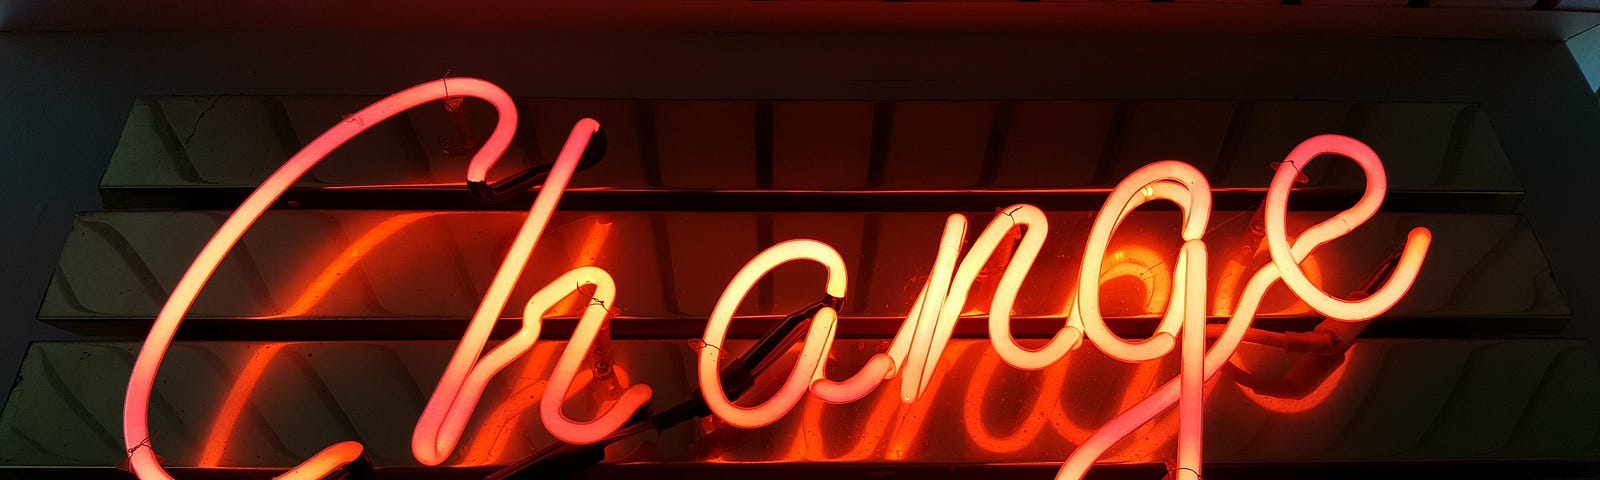 Change on a neon sign.